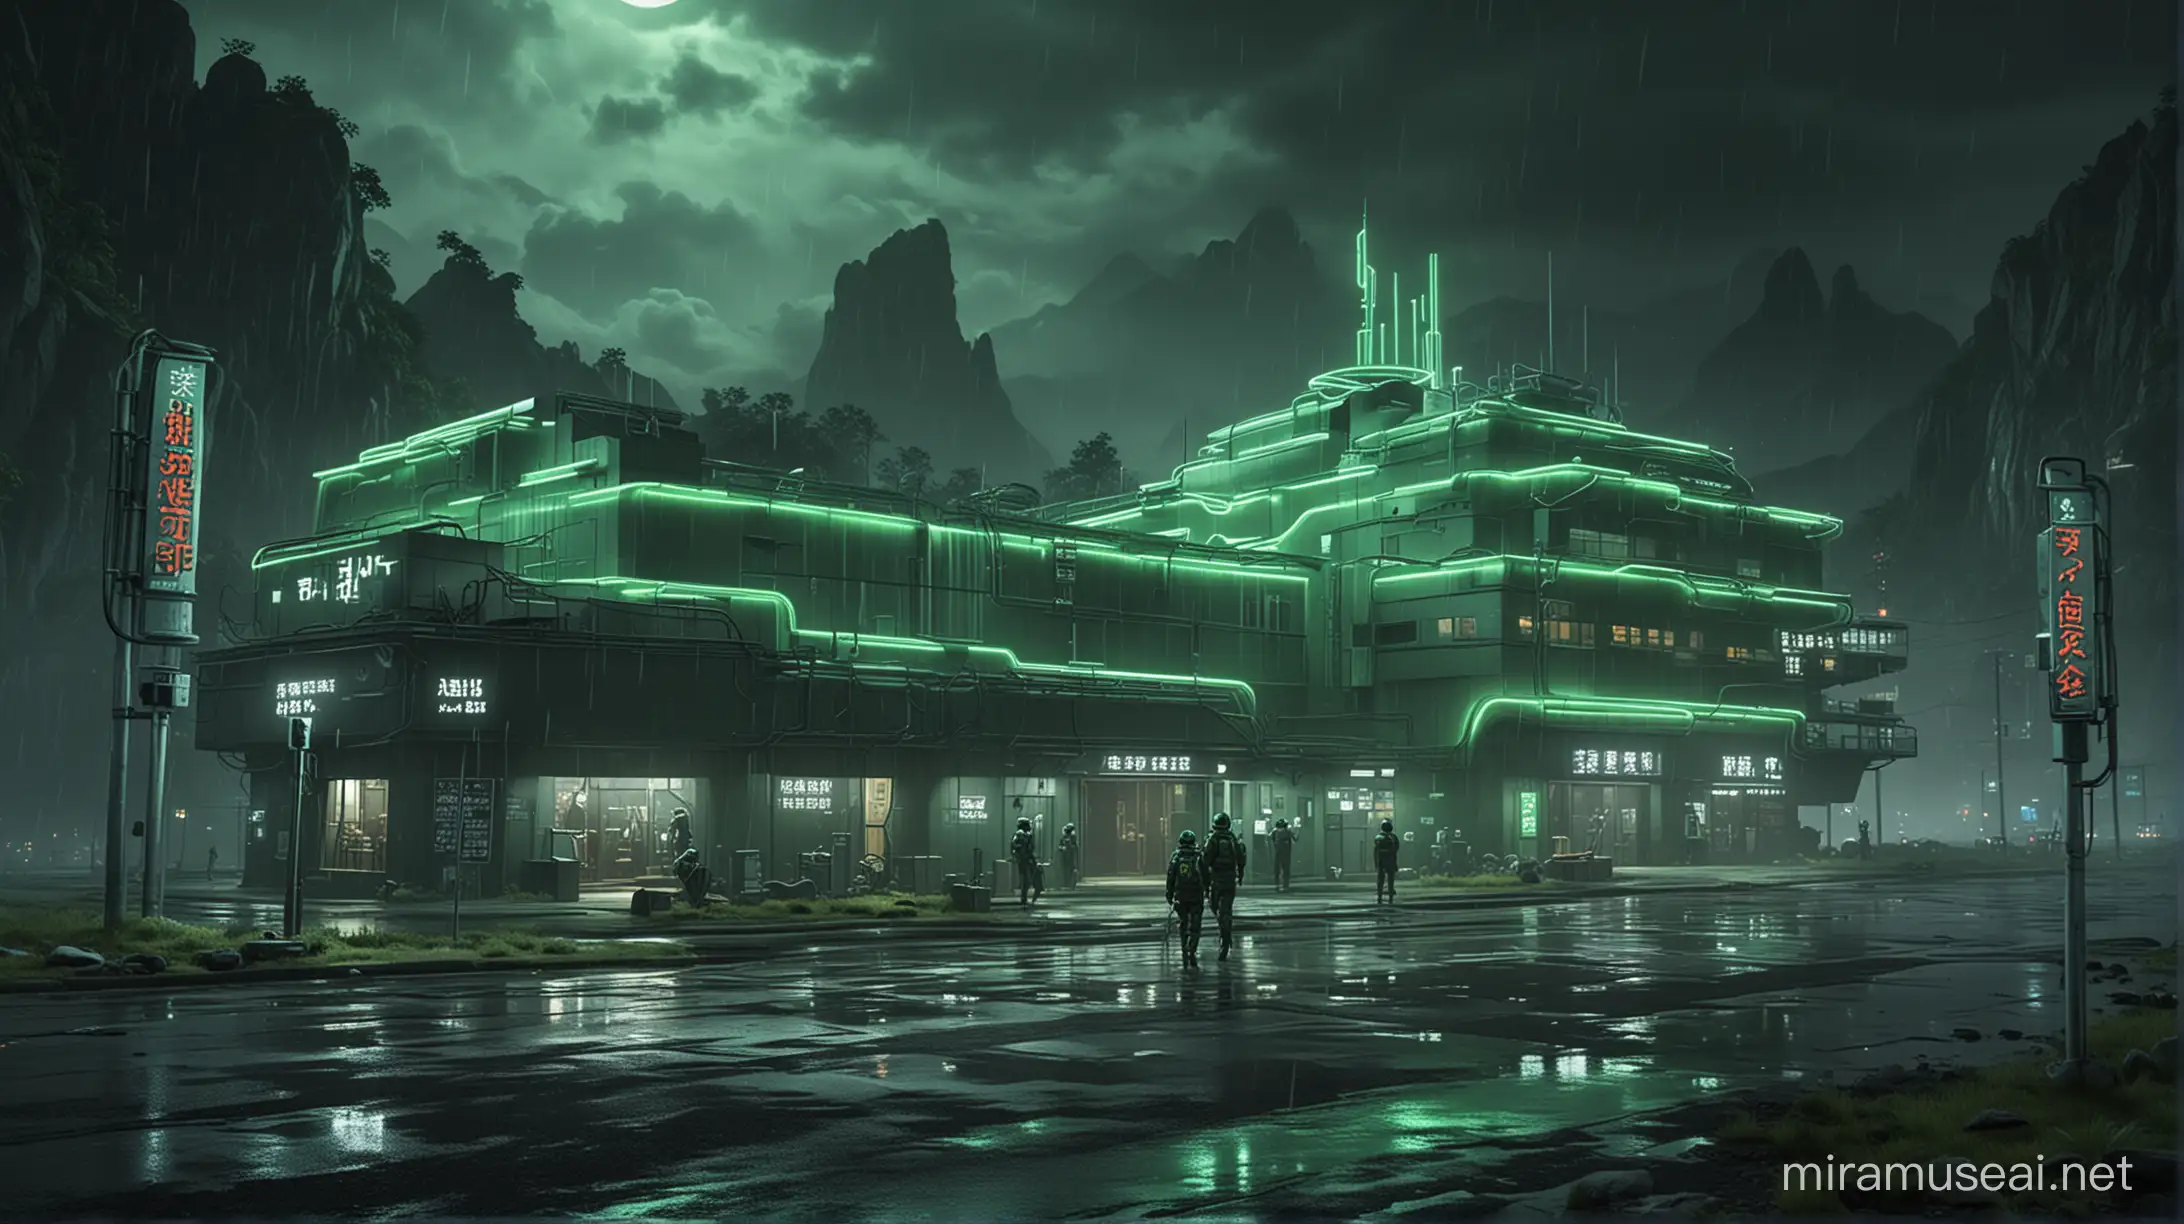 Realistic research centers buildings with one worker around it, green neon and huge neon lights inside the part, its color shadow on the floor, Rainy weather, staff in dark green uniforms and helmets, Atmospheric and cinematic, The huge structures, A dark green smoke rose from the research centers environment and spread in the air, The image space is outside the realistic research center.
with huge satellite antennas,
A huge cubic green neon object,
in the Realistic mountains.
atmospheric and cinematic.
All overall dark green image theme.
Very big lights and lots of green neon lights.
The neon lights in the image should be very bright throughout the image.
The neon lights in the picture should be very bright in the dark
The neon lights in the picture should be very bright.
Very large and bright neon lamps in the structure.
Shades of green throughout the image.
3D.
Several large advanced and strange buildings nearby.
With large Japanese inscriptions on the structure.